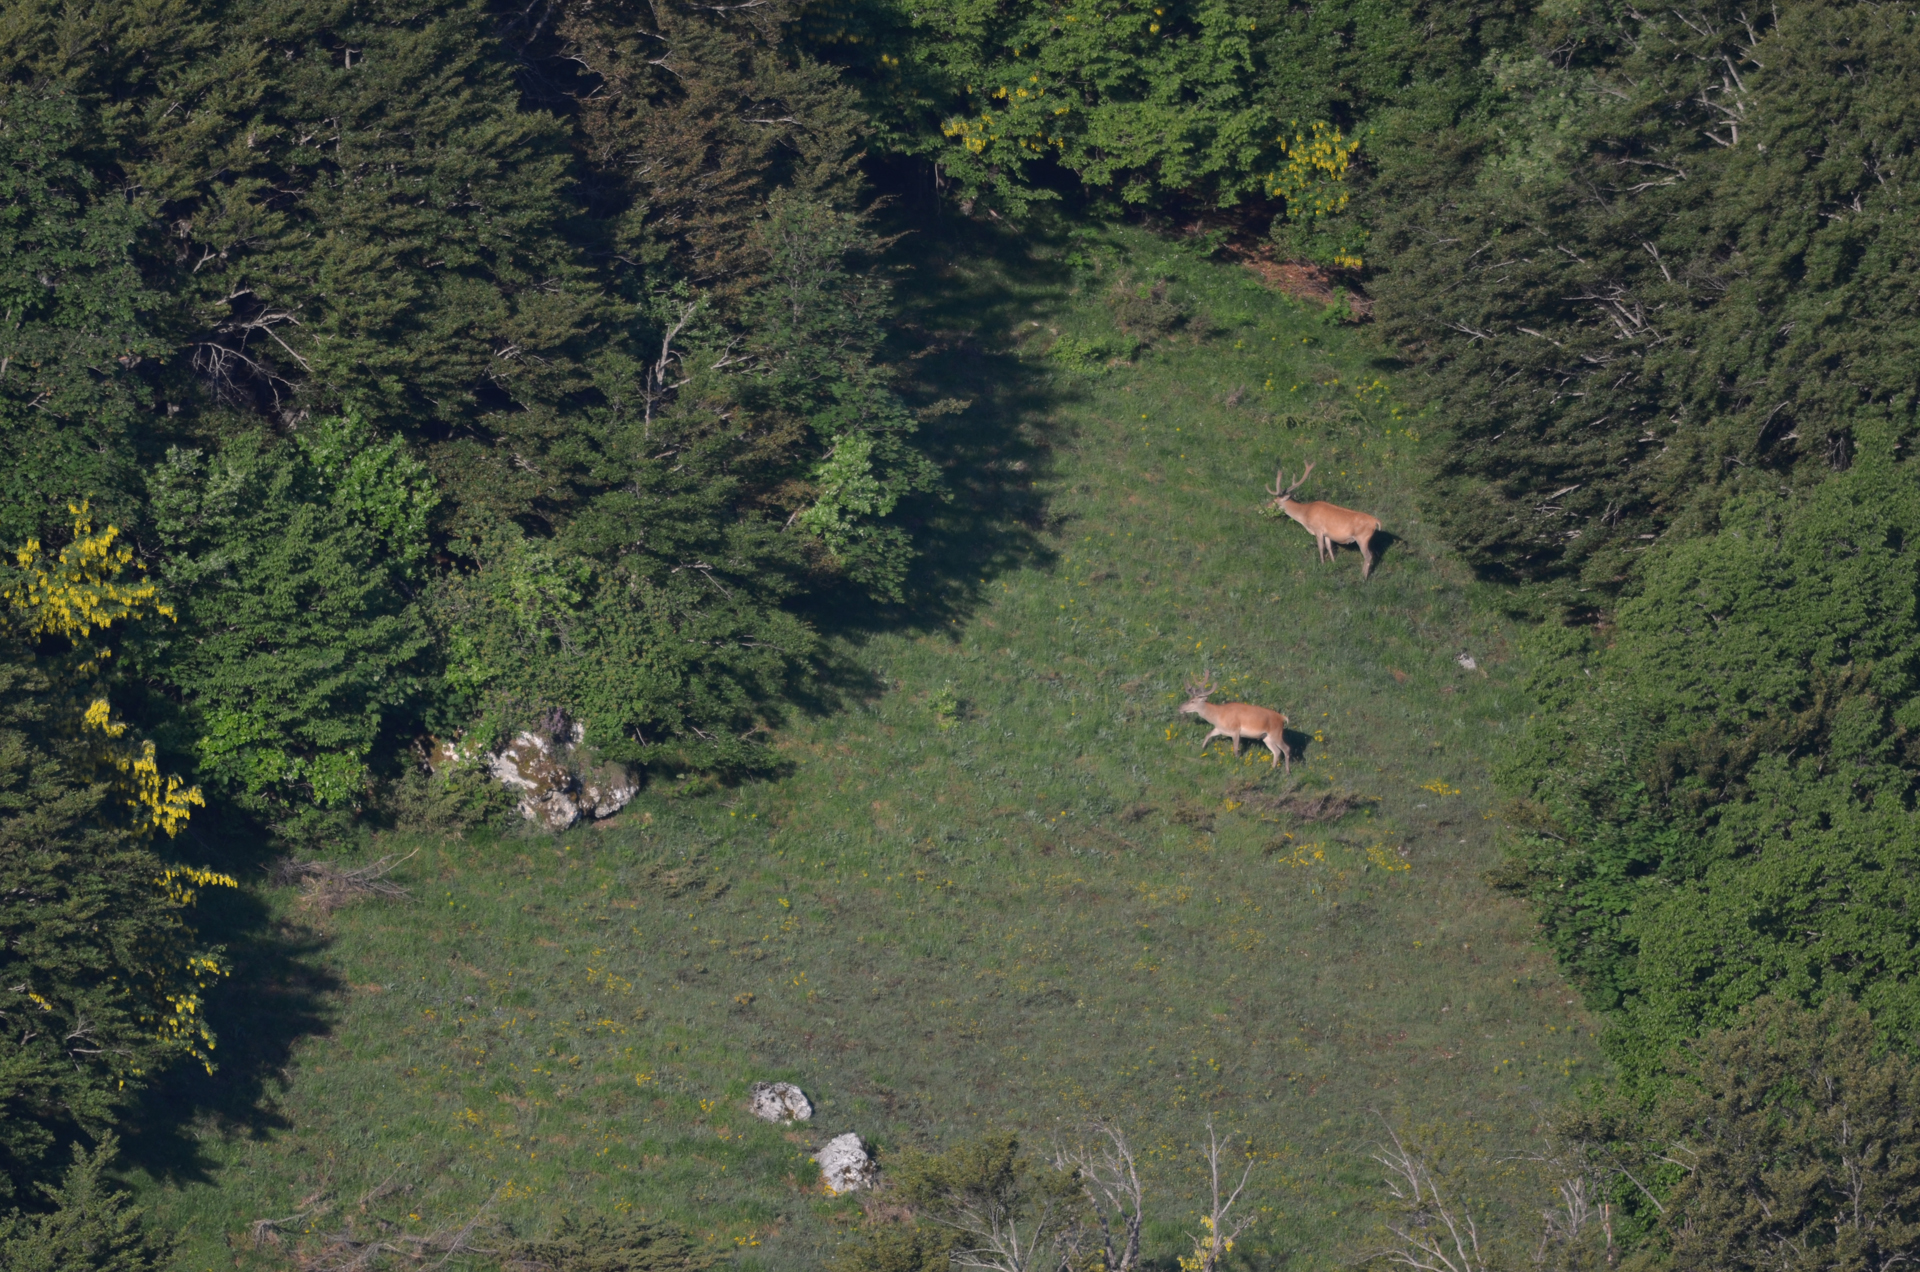 Red deer was the most common wild animal at the lookout